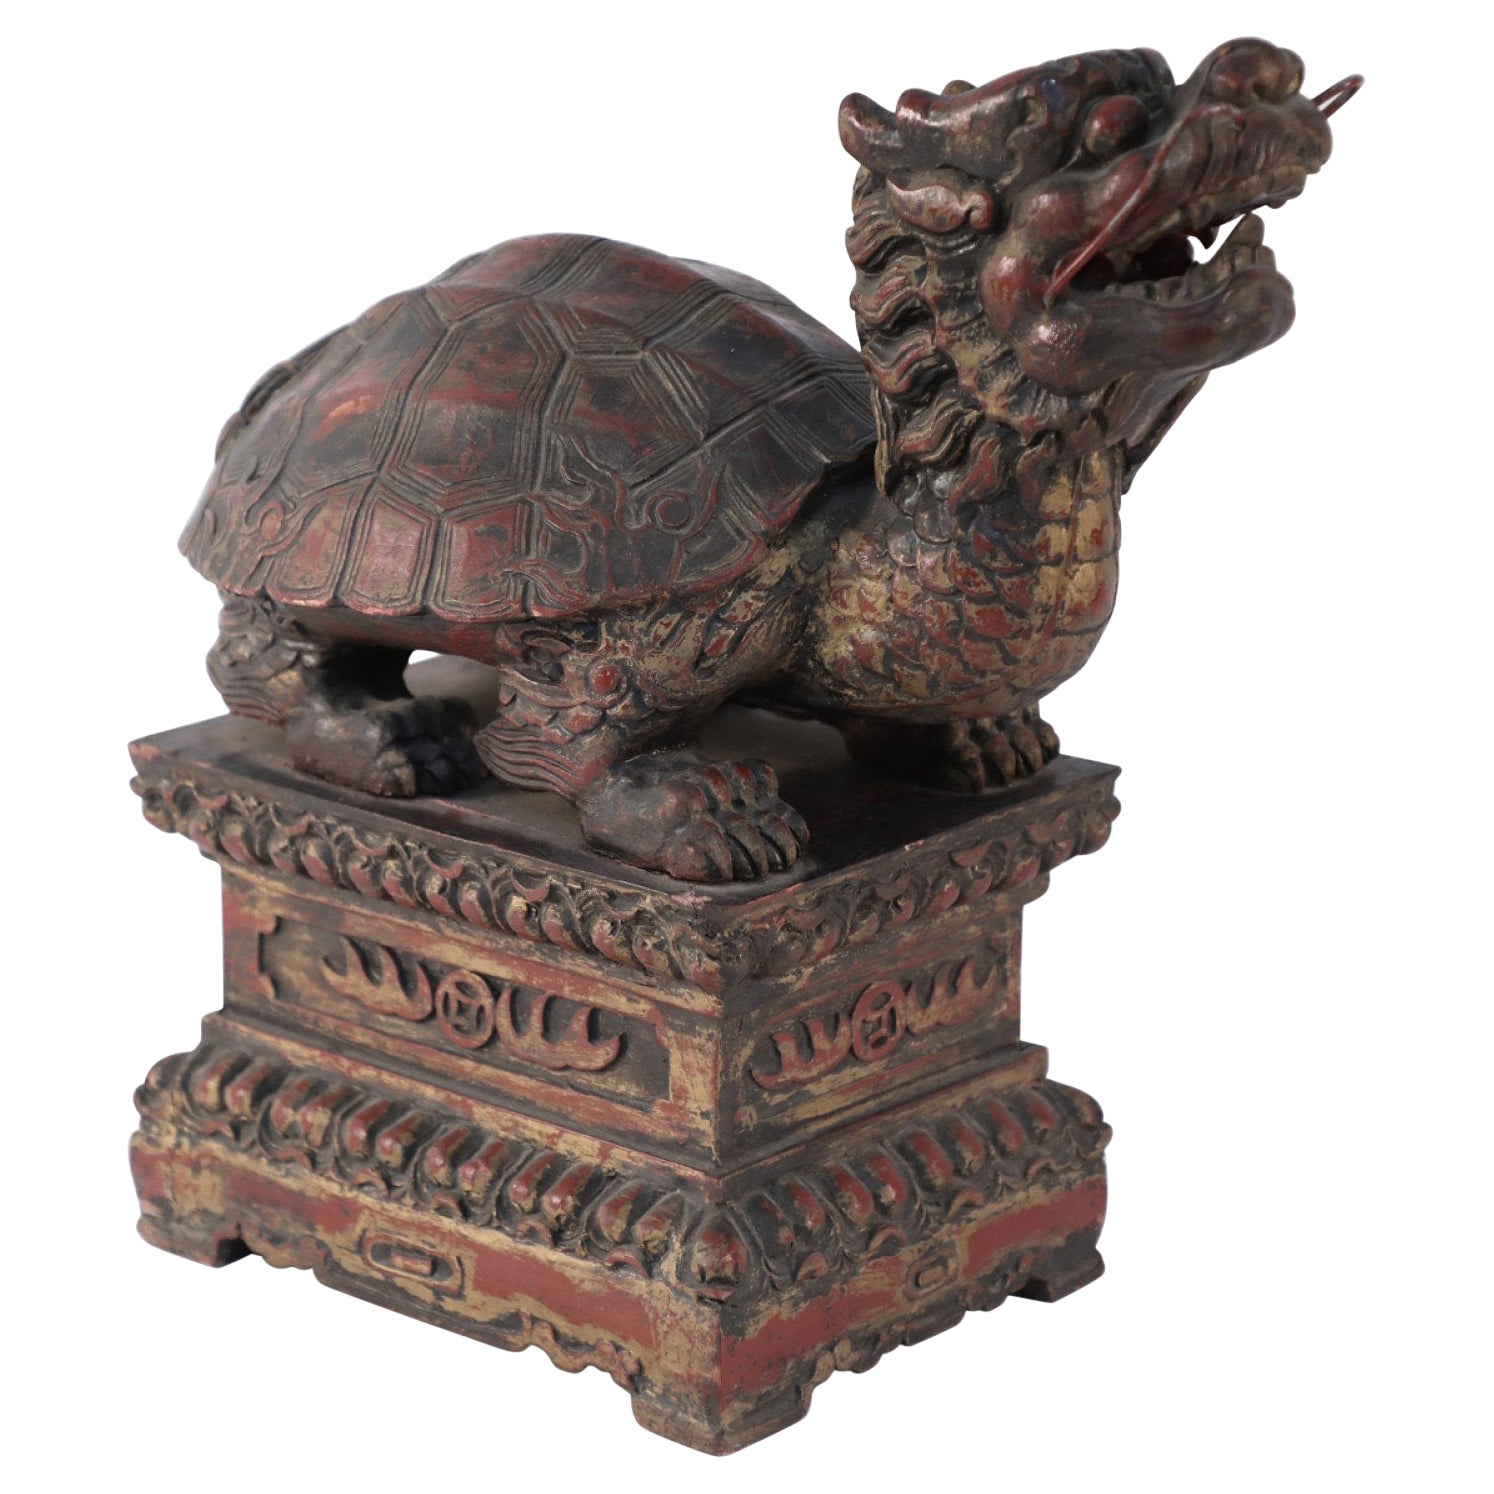 Antique Chinese Carved Wooden Longgui Dragon Turtle Sculpture